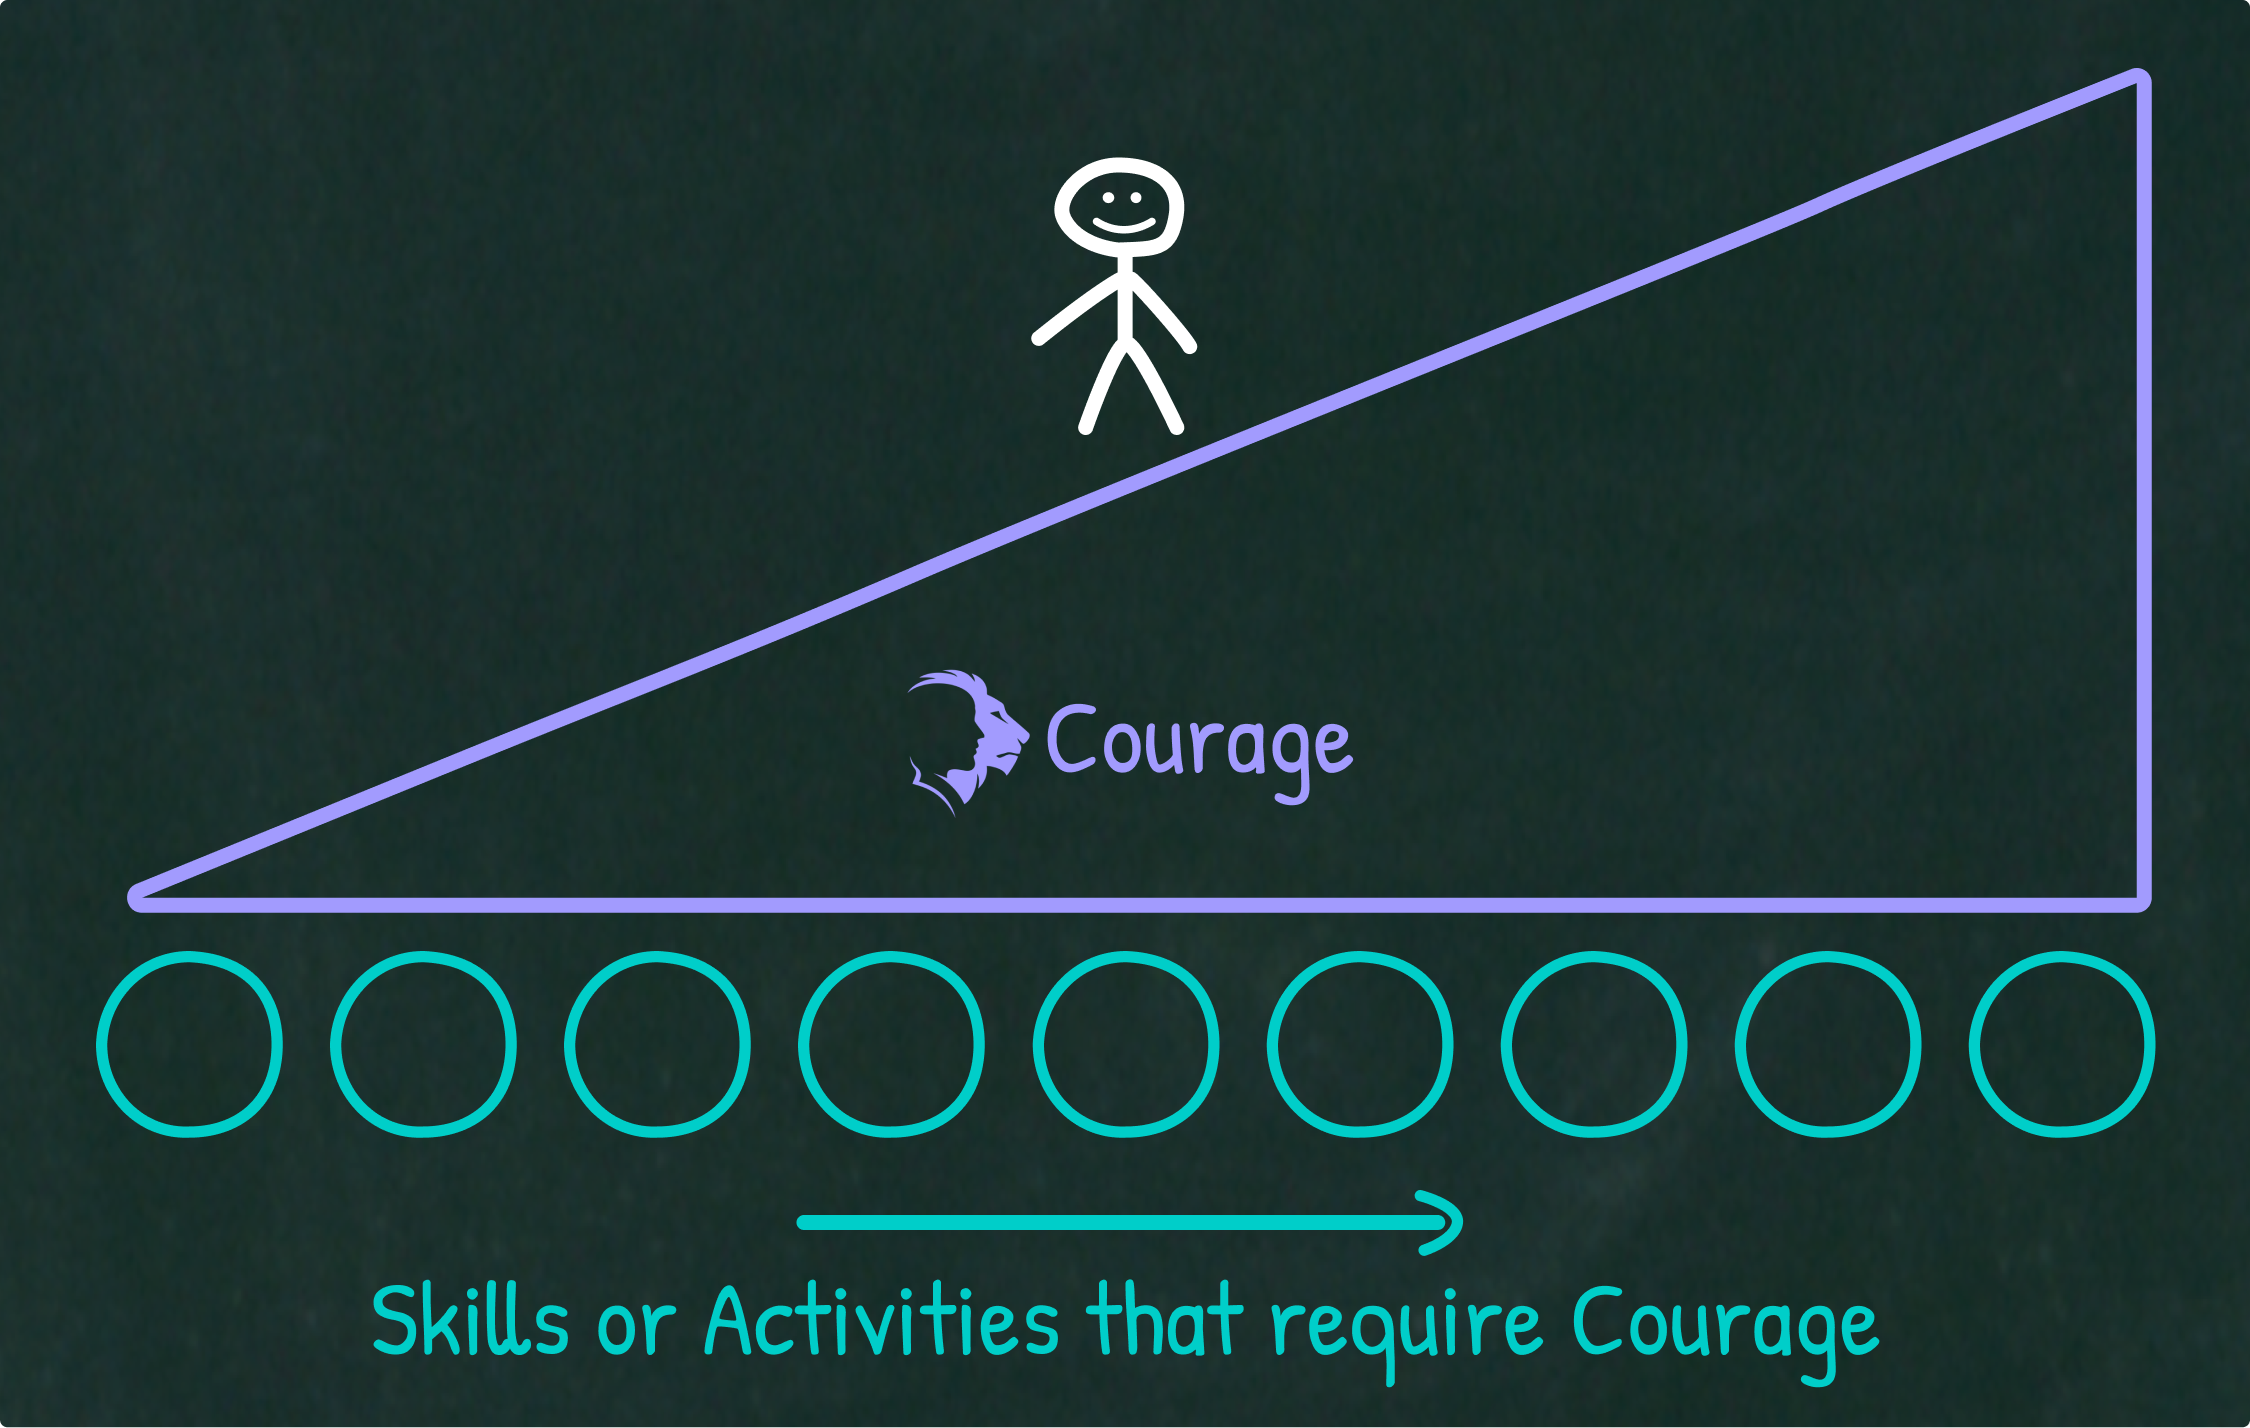 An individual building courage by displaying courage in specific skills and activities.